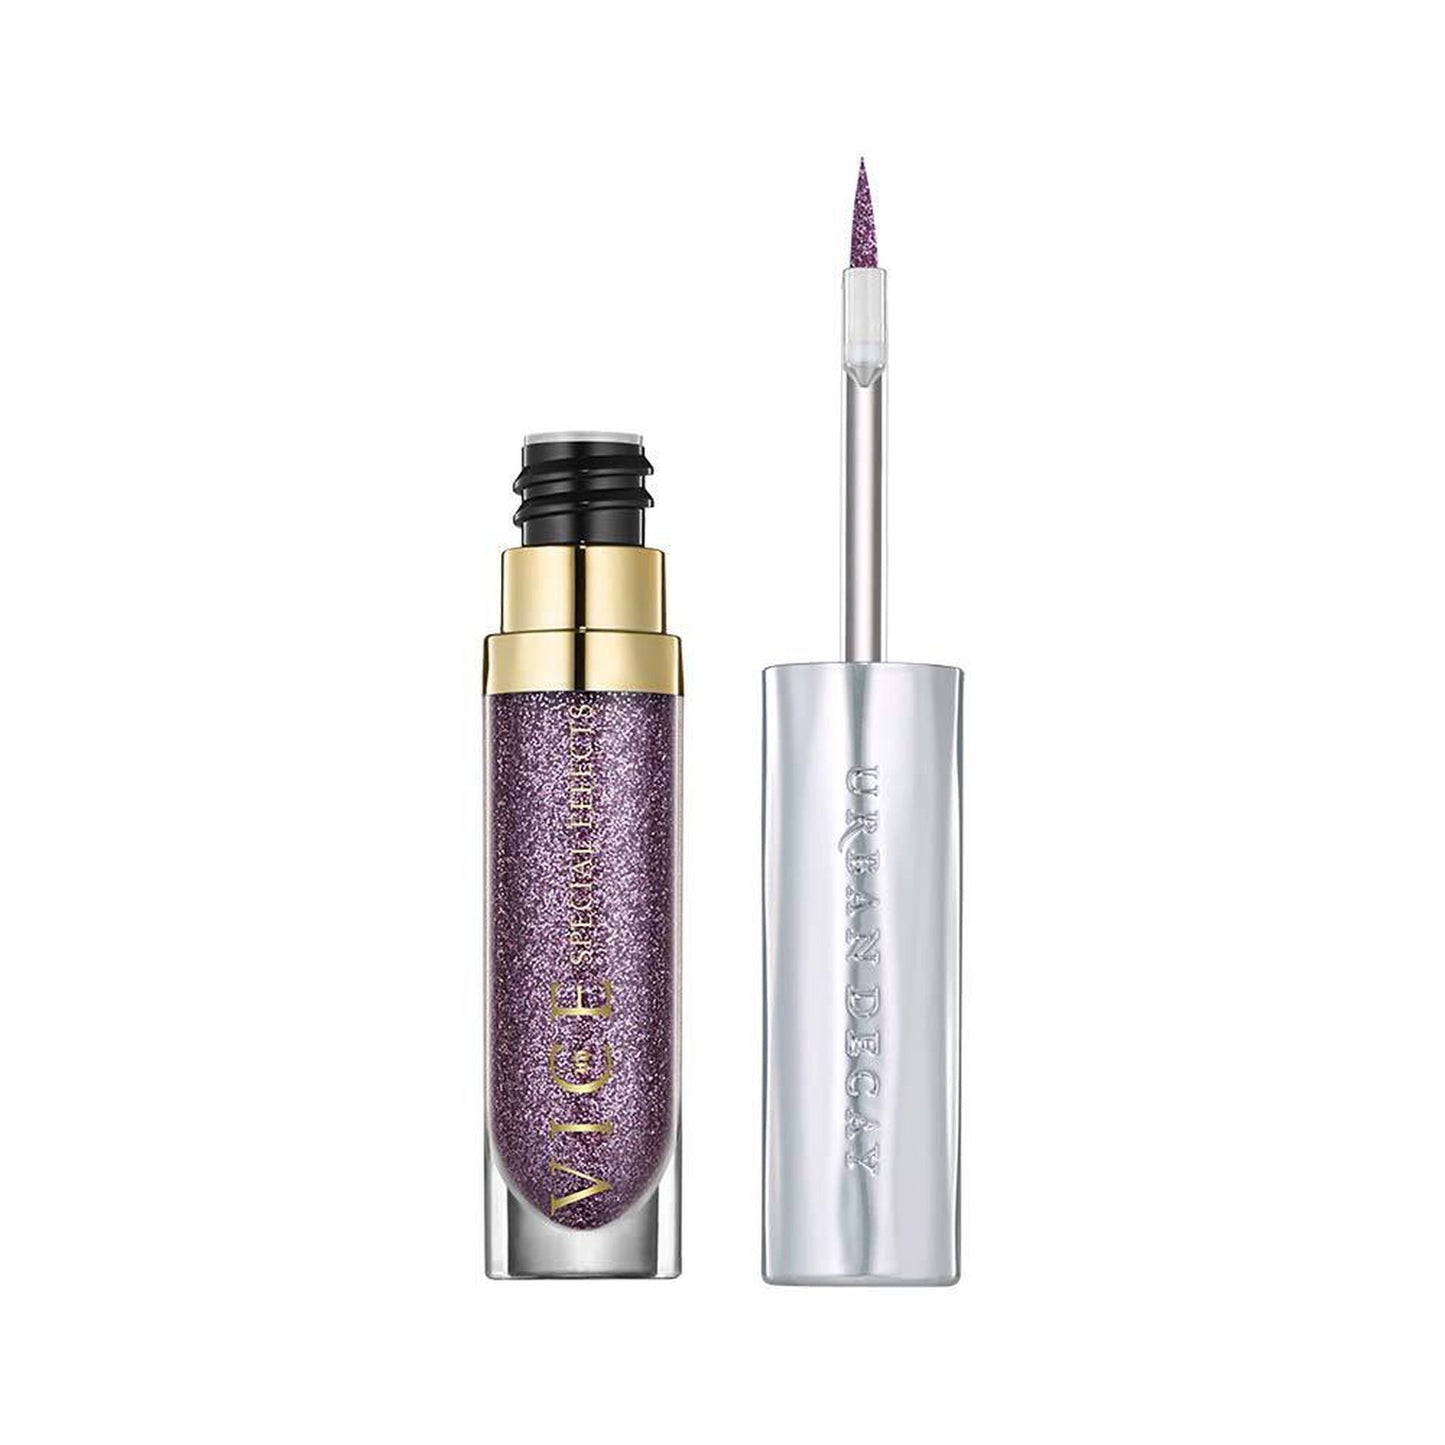 Urban Decay VICE SPECIAL EFFECTS Long-Lasting Water-Resistant Lip Topcoat Regulate-URBAN DECAY-BeautyNmakeup.co.uk